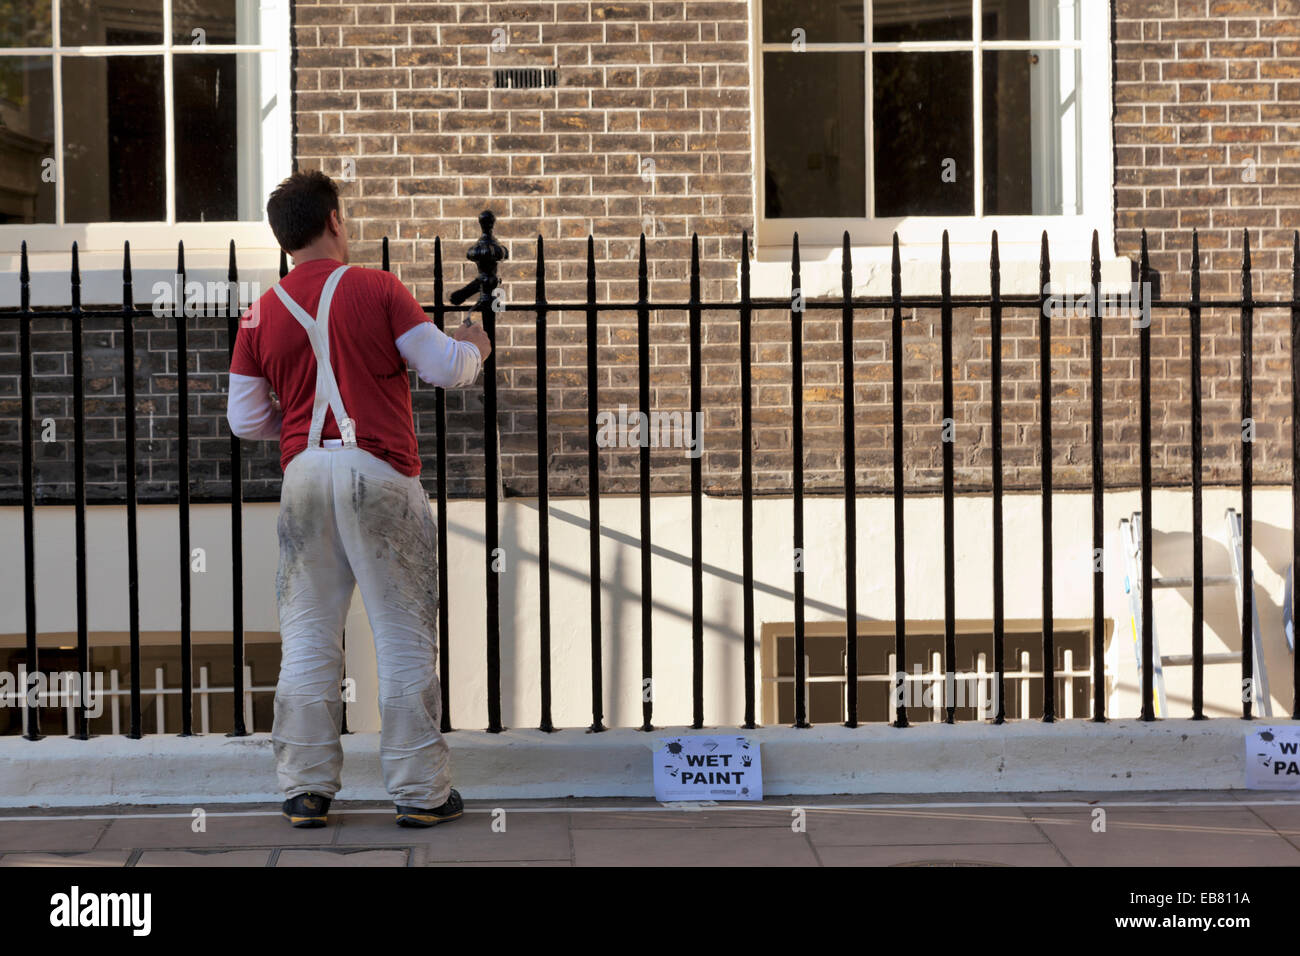 Painter painting railing in Bloomsbury with wet paint signs Stock Photo